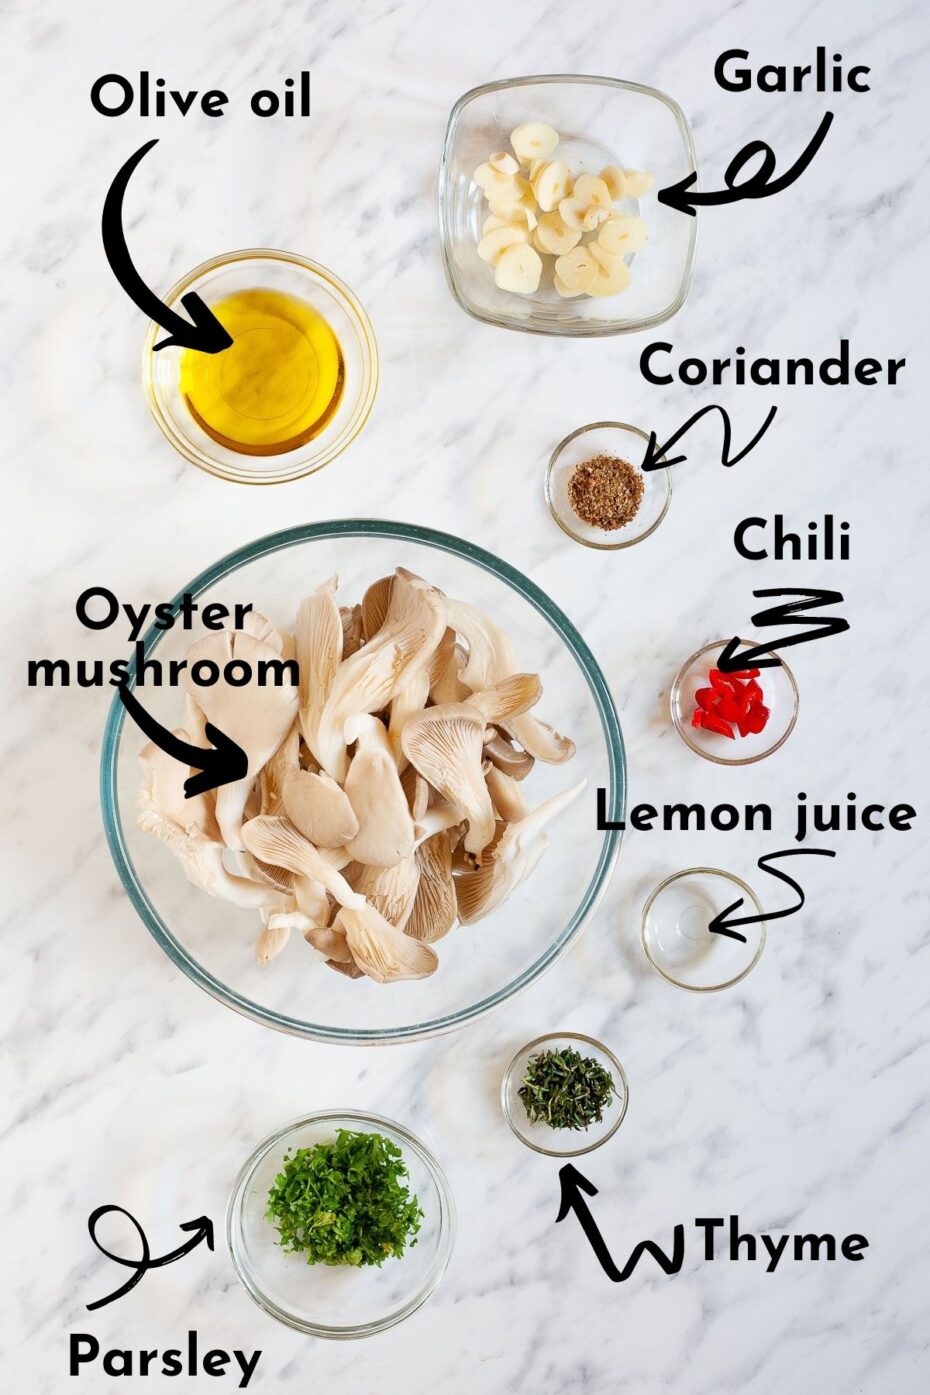 Ingredients to make pan-fried oyster mushrooms is measured in glass bowls like light brown oyster mushroom, olive oil, garlic slices, coriander, chili, lemon juice, thyme and parsley all with text overlay